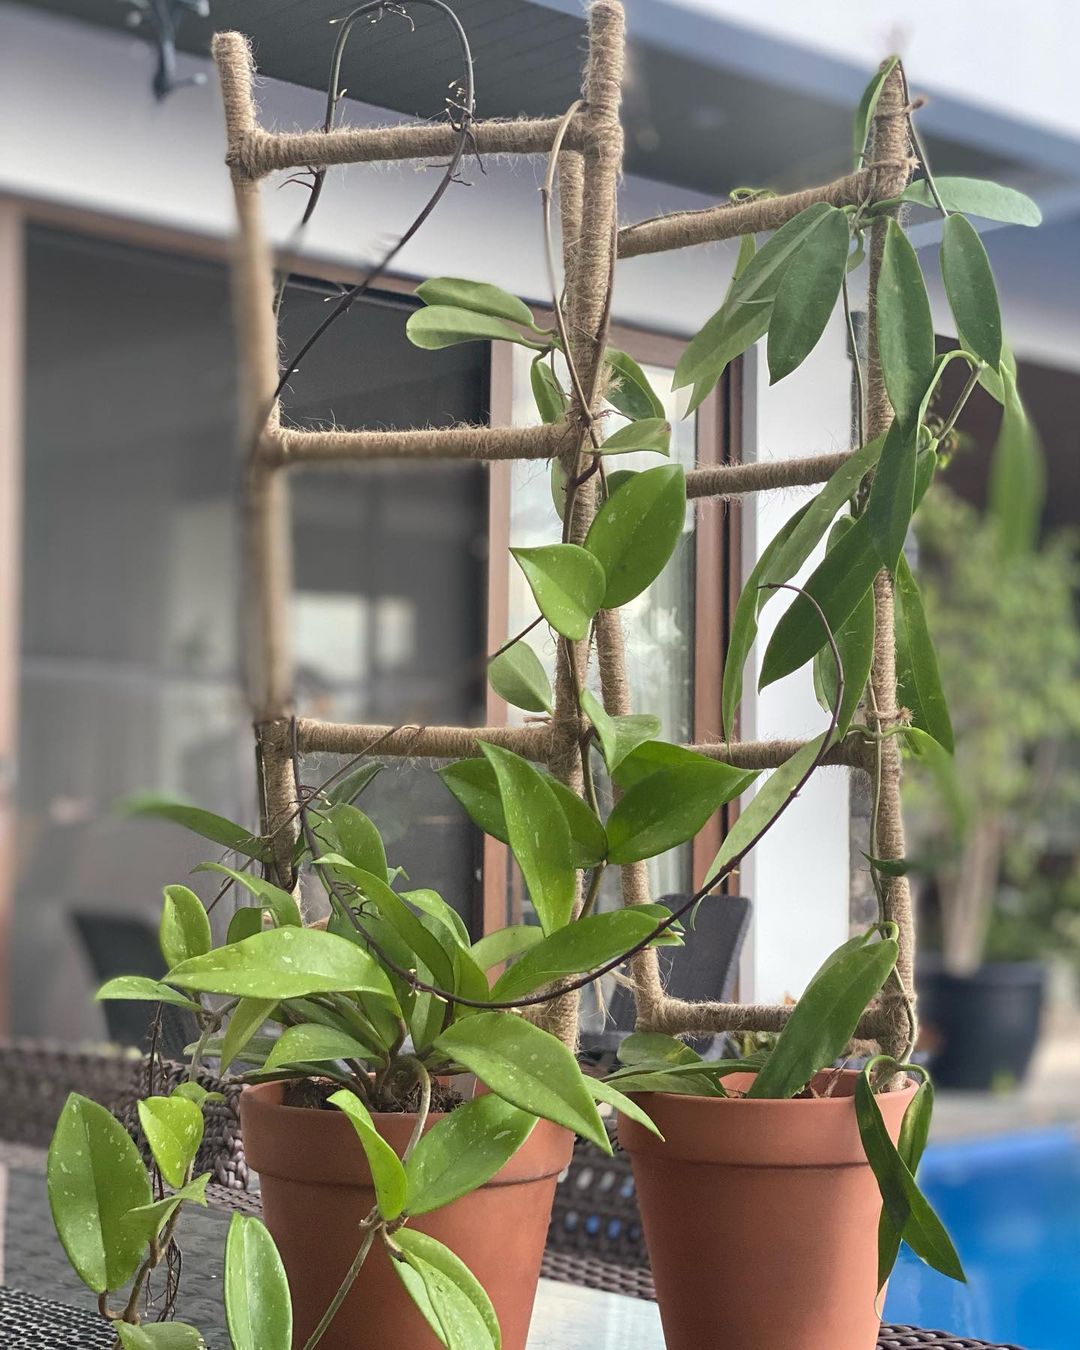 Two potted plants by a pool, one Hoya plant.